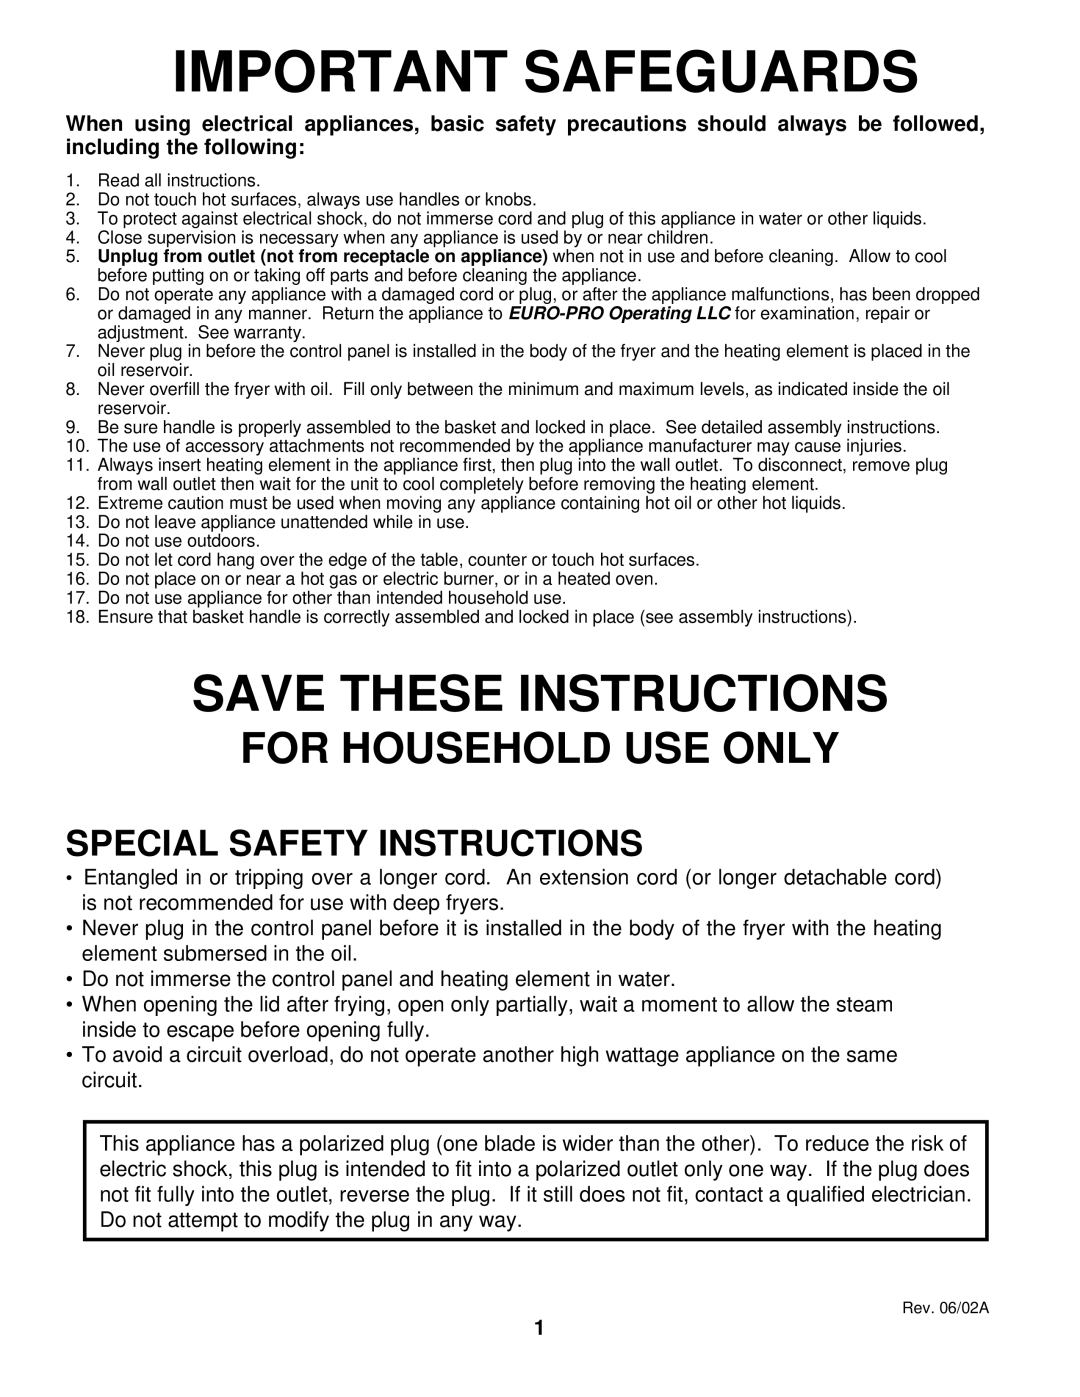 Euro-Pro BF160 manual Save These Instructions, For Household Use Only, Special Safety Instructions, Important Safeguards 